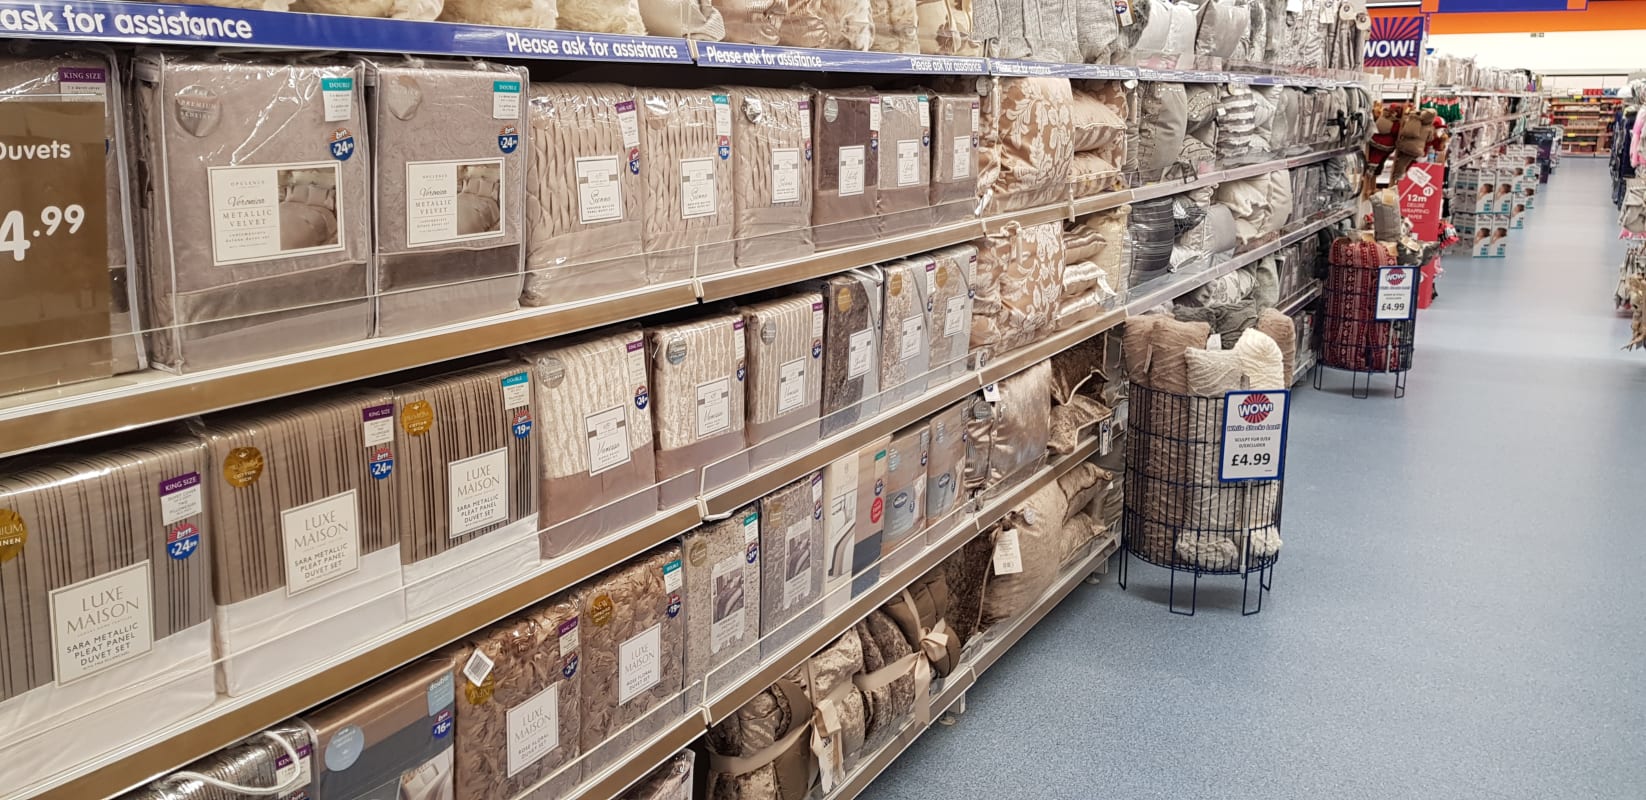 B&M's Shrewsbury store has plenty to offer customers, including beautiful home decor and soft furnishings in a range of styles and colours.